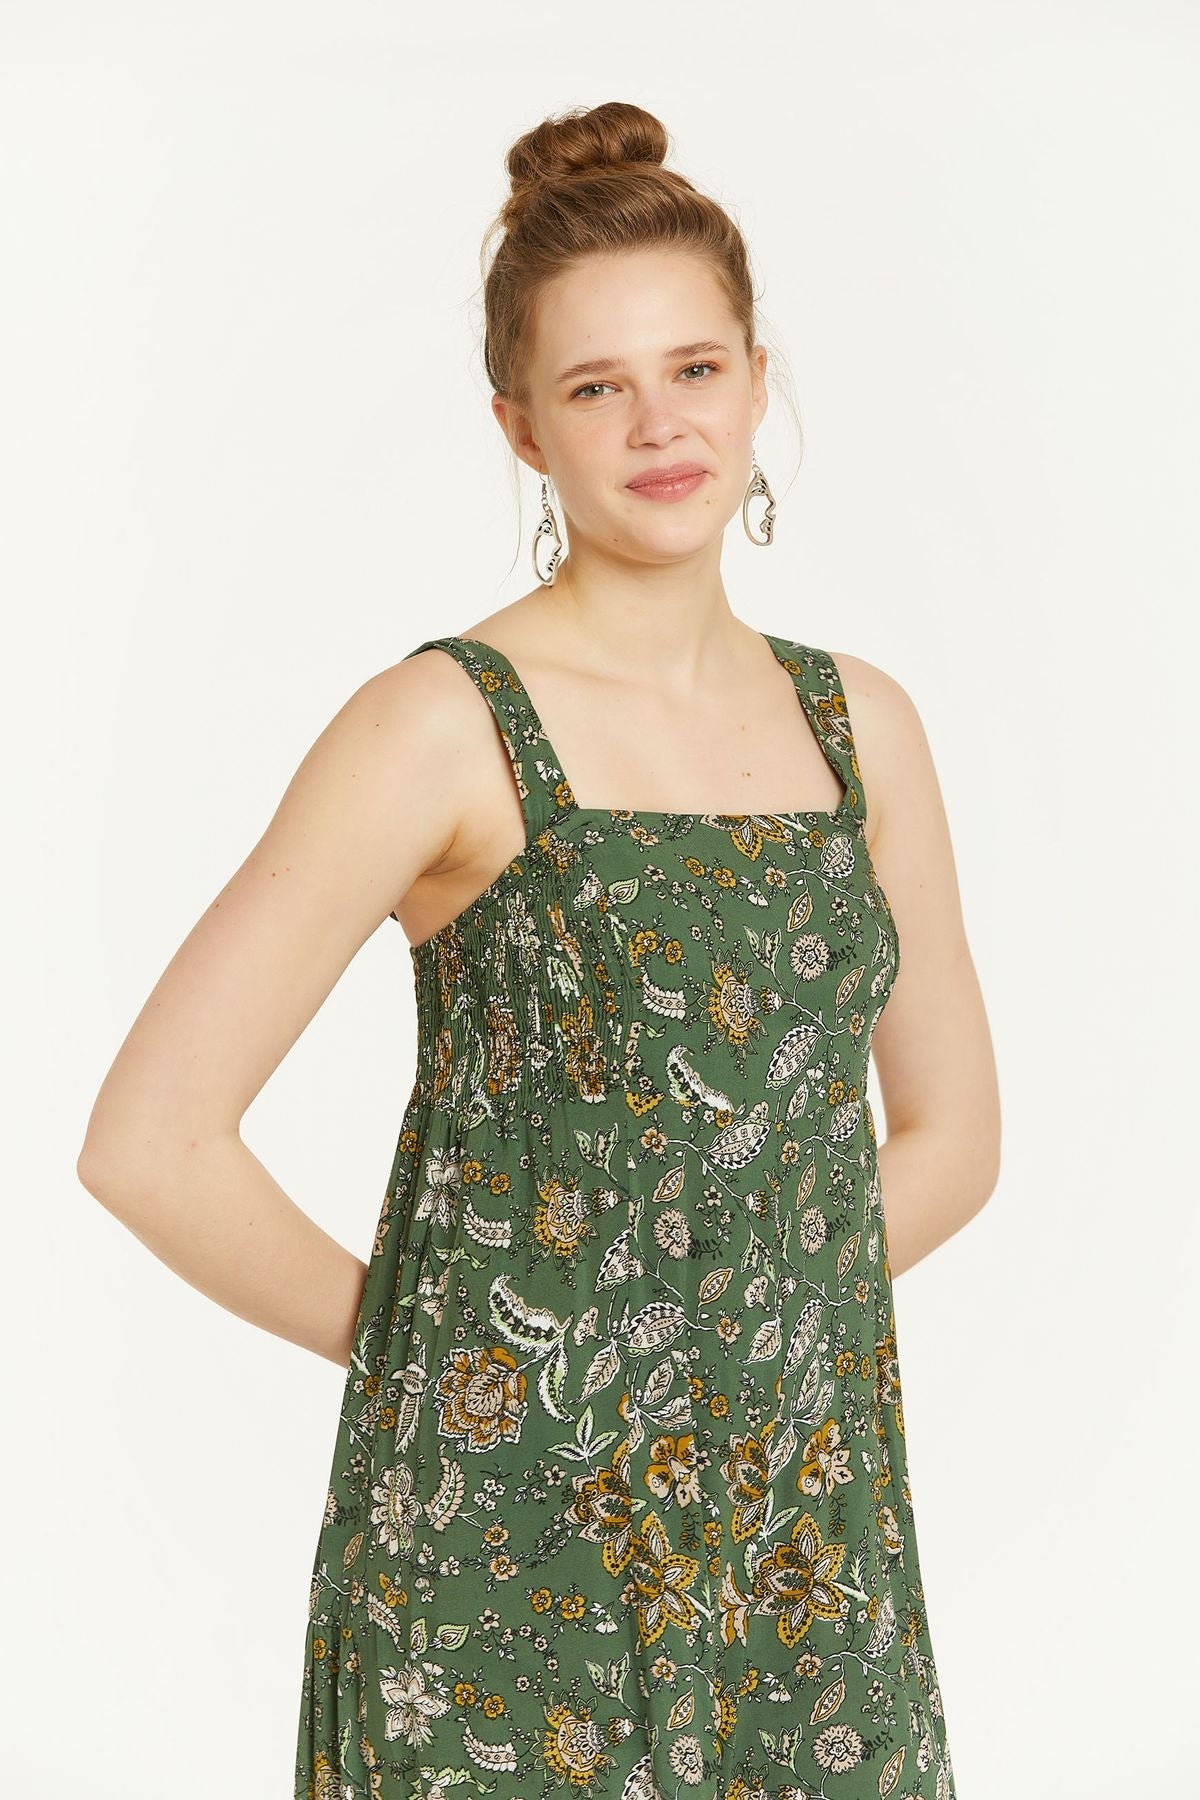 Flower Print Flowy Jumpsuit with Square Neck Green